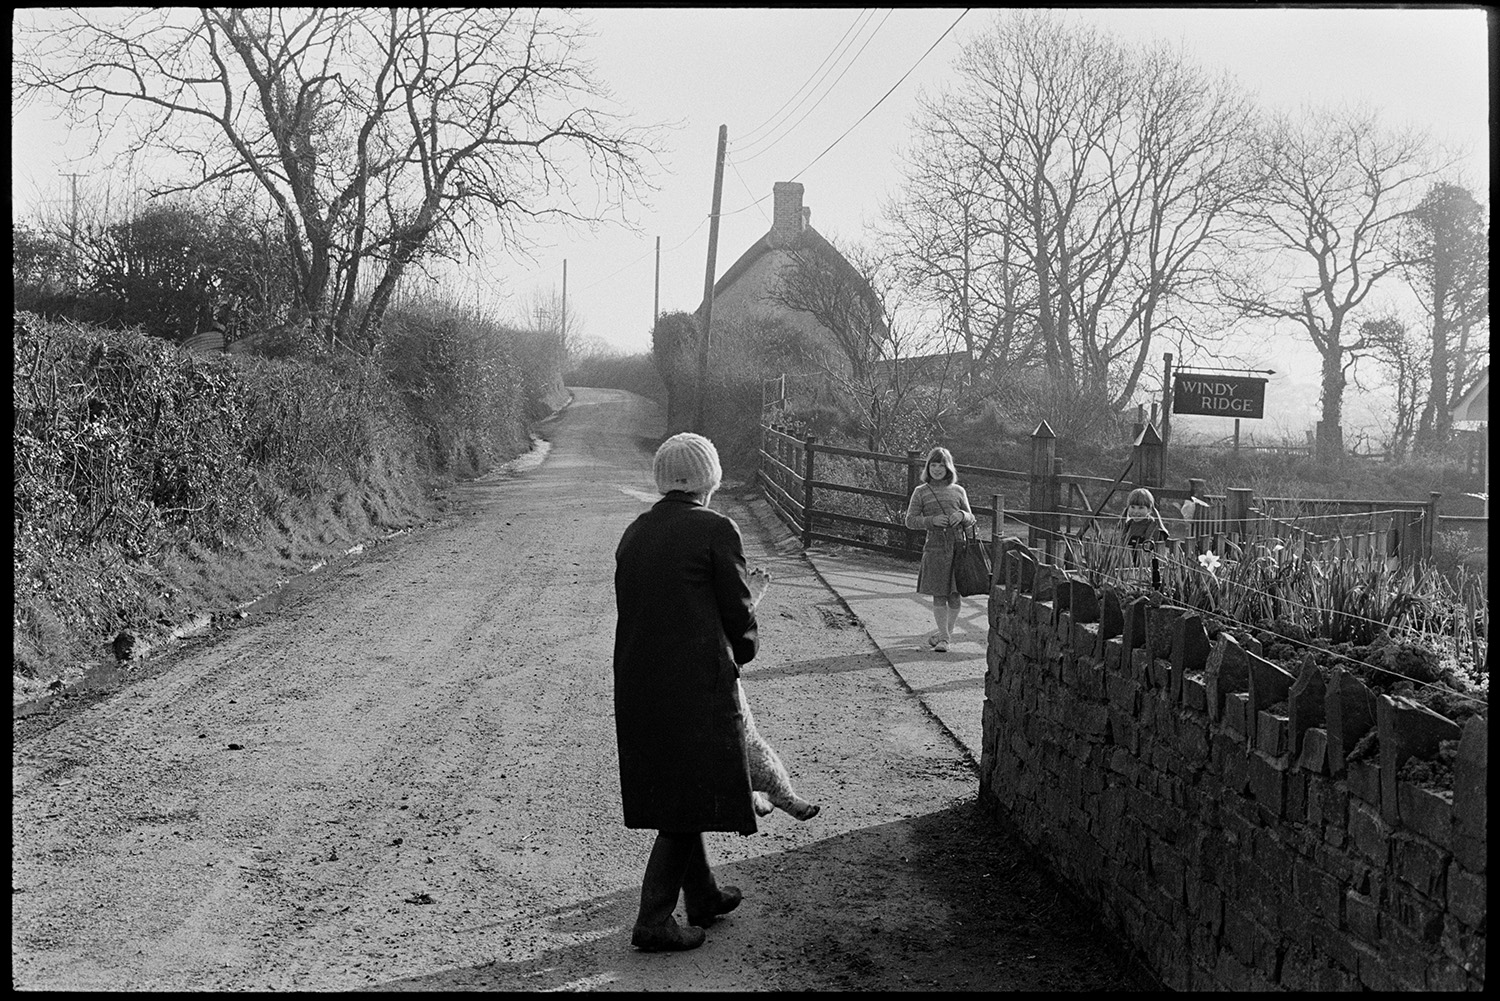 School bus, woman walking dogs. 
[Two girls talking to Evelyn Folland, who is carrying a lamb, while they wait for the school bus outside Windy Ridge at Upcott, Dolton.]